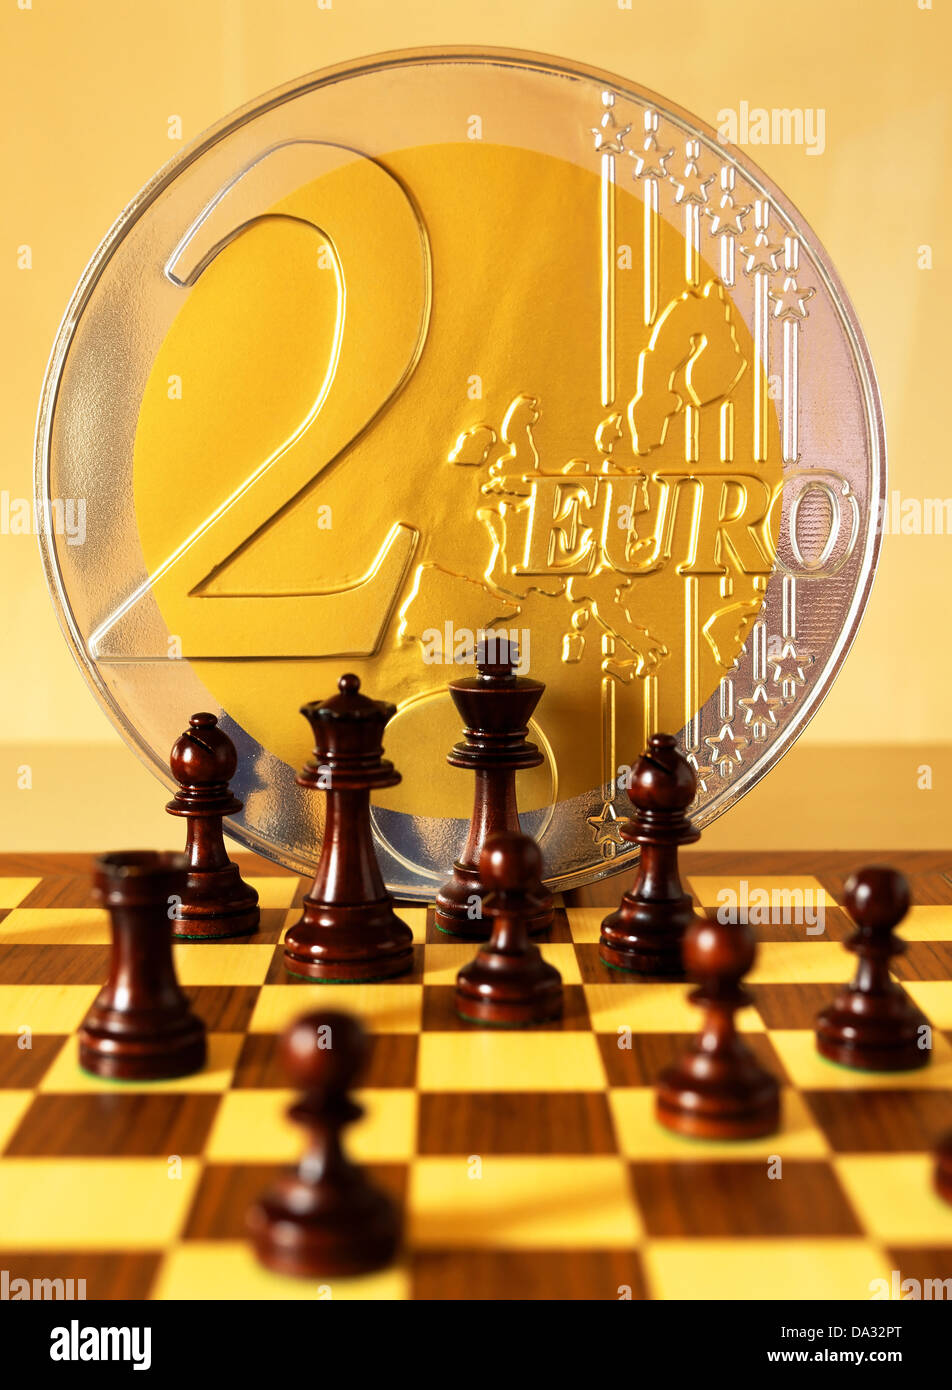 Chessmen and giant golden 2 Euro coin on chessboard Stock Photo